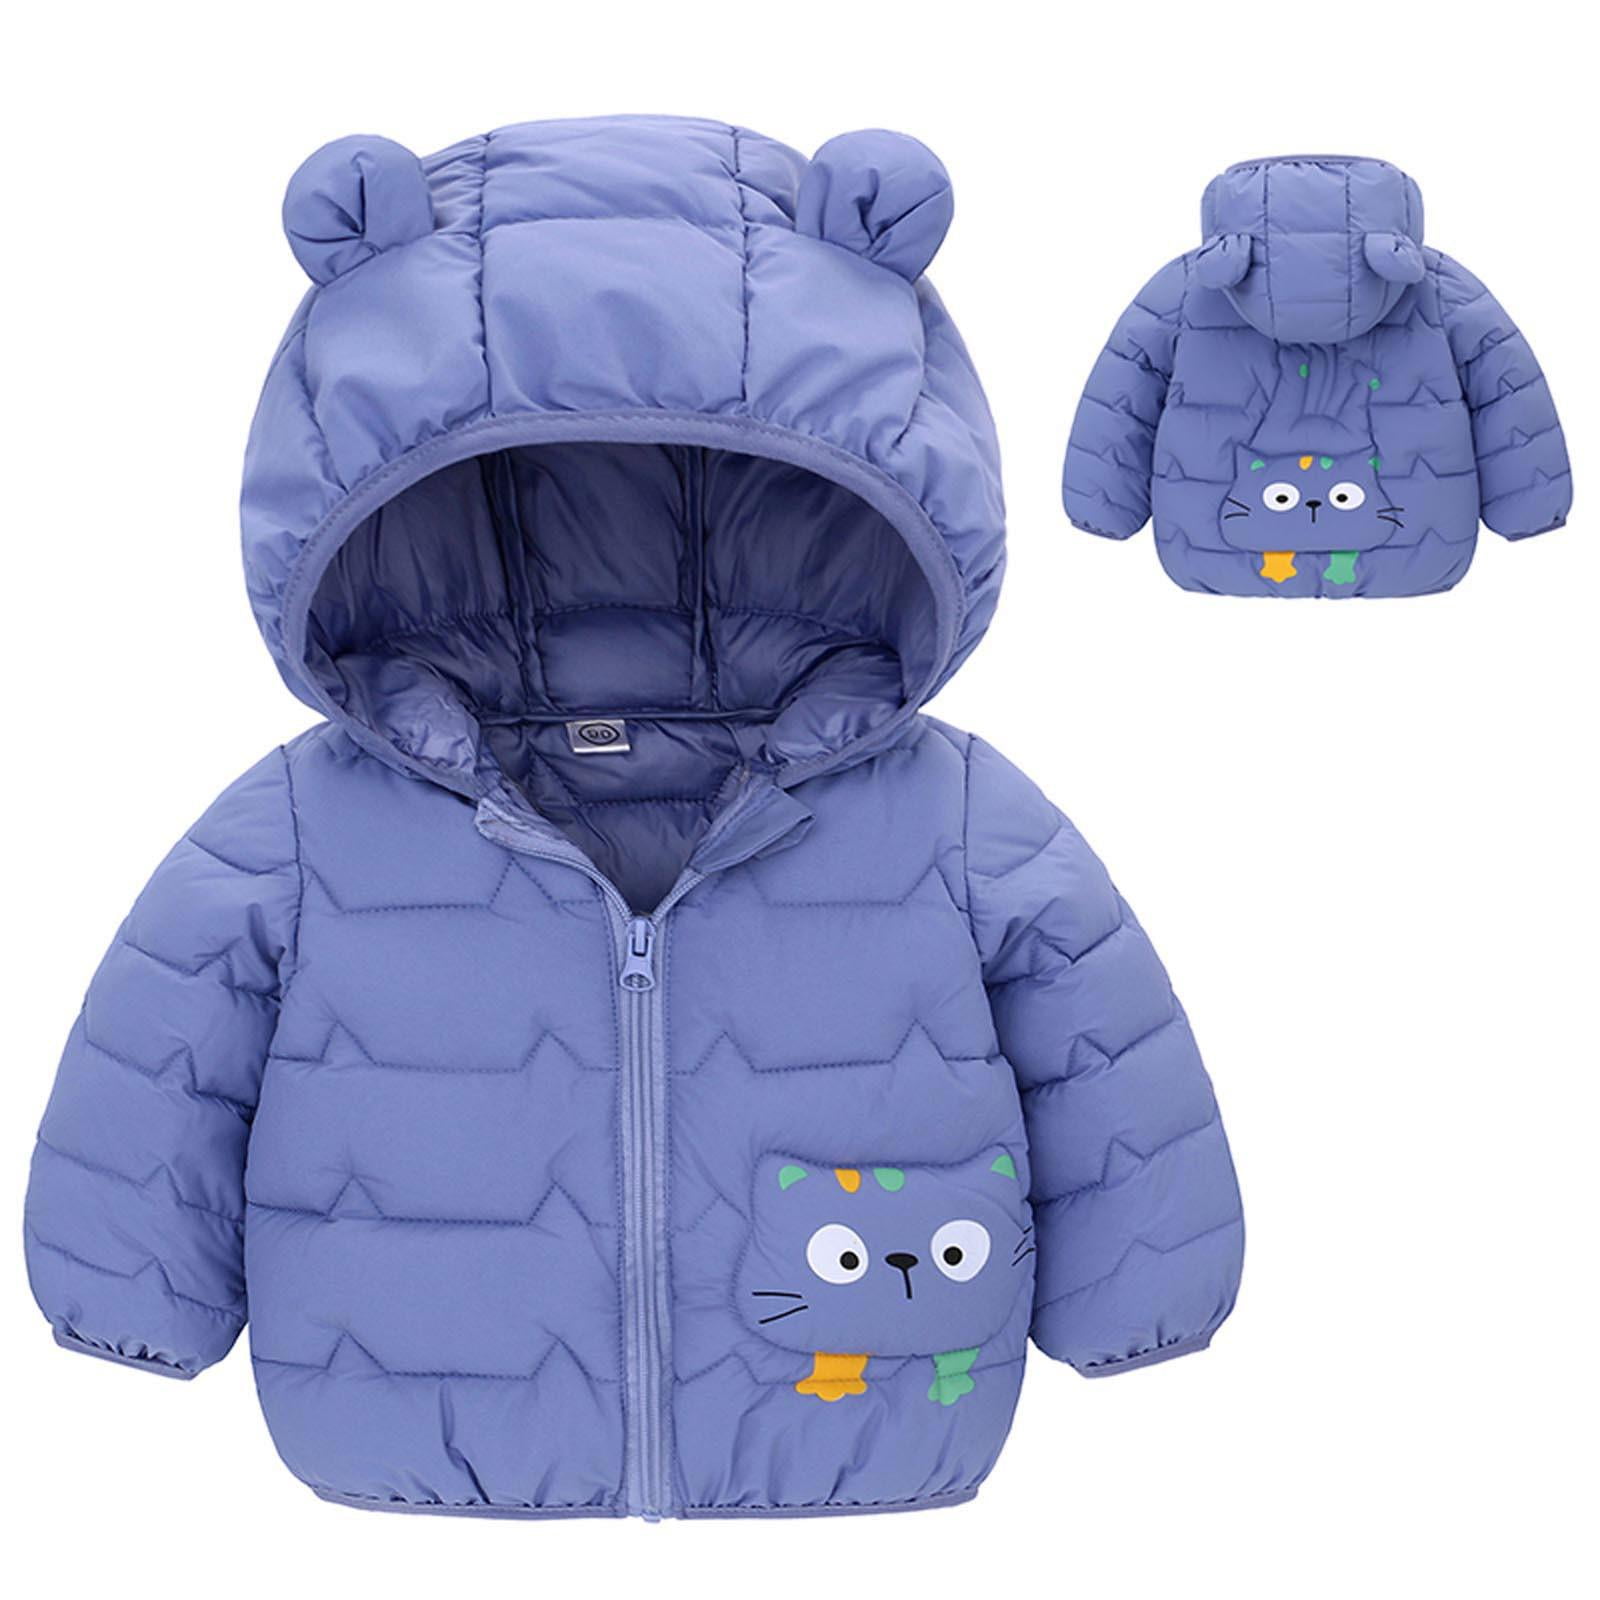 Tdoqot Jackets for Girls and Boys Soft Zip up with Hood Cute Fall ...